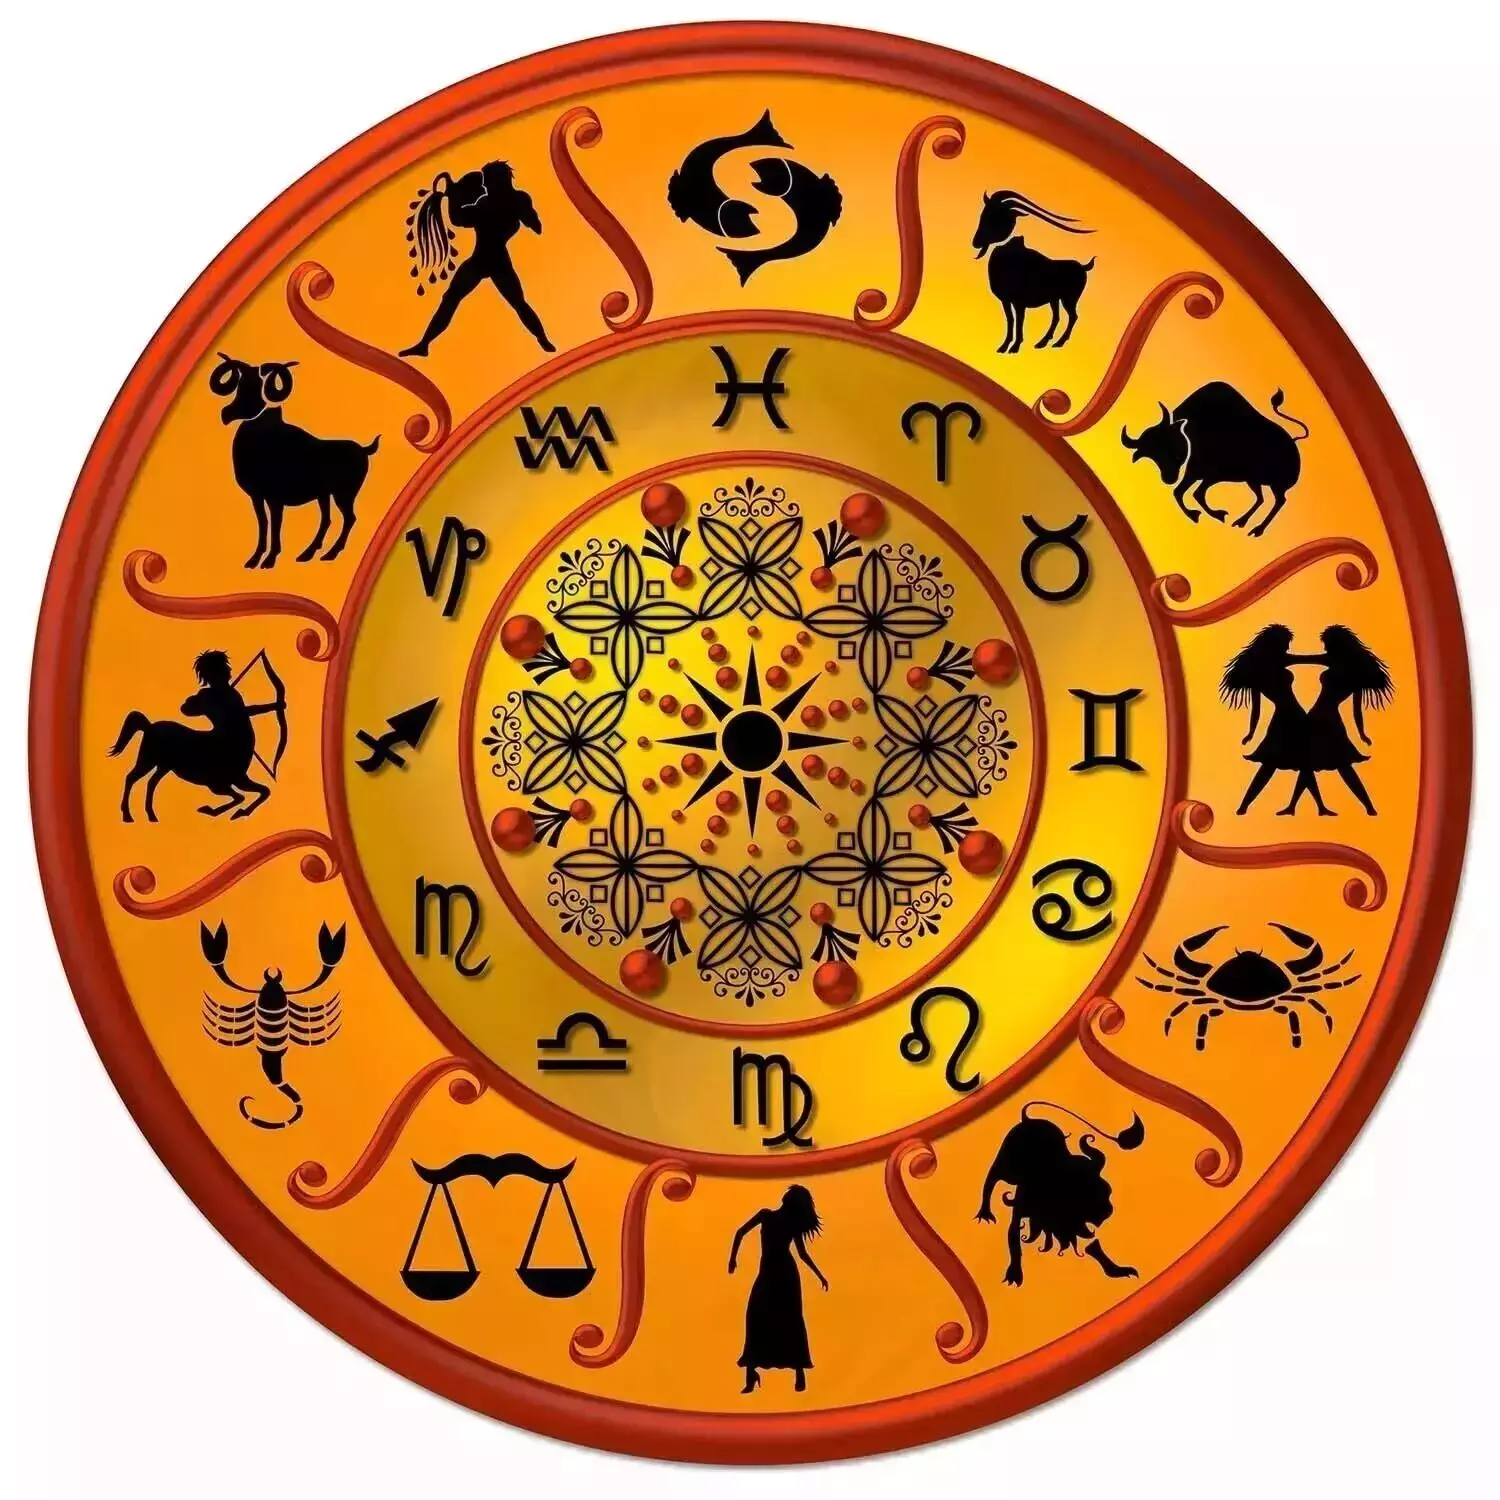 29 January – Know your todays horoscope